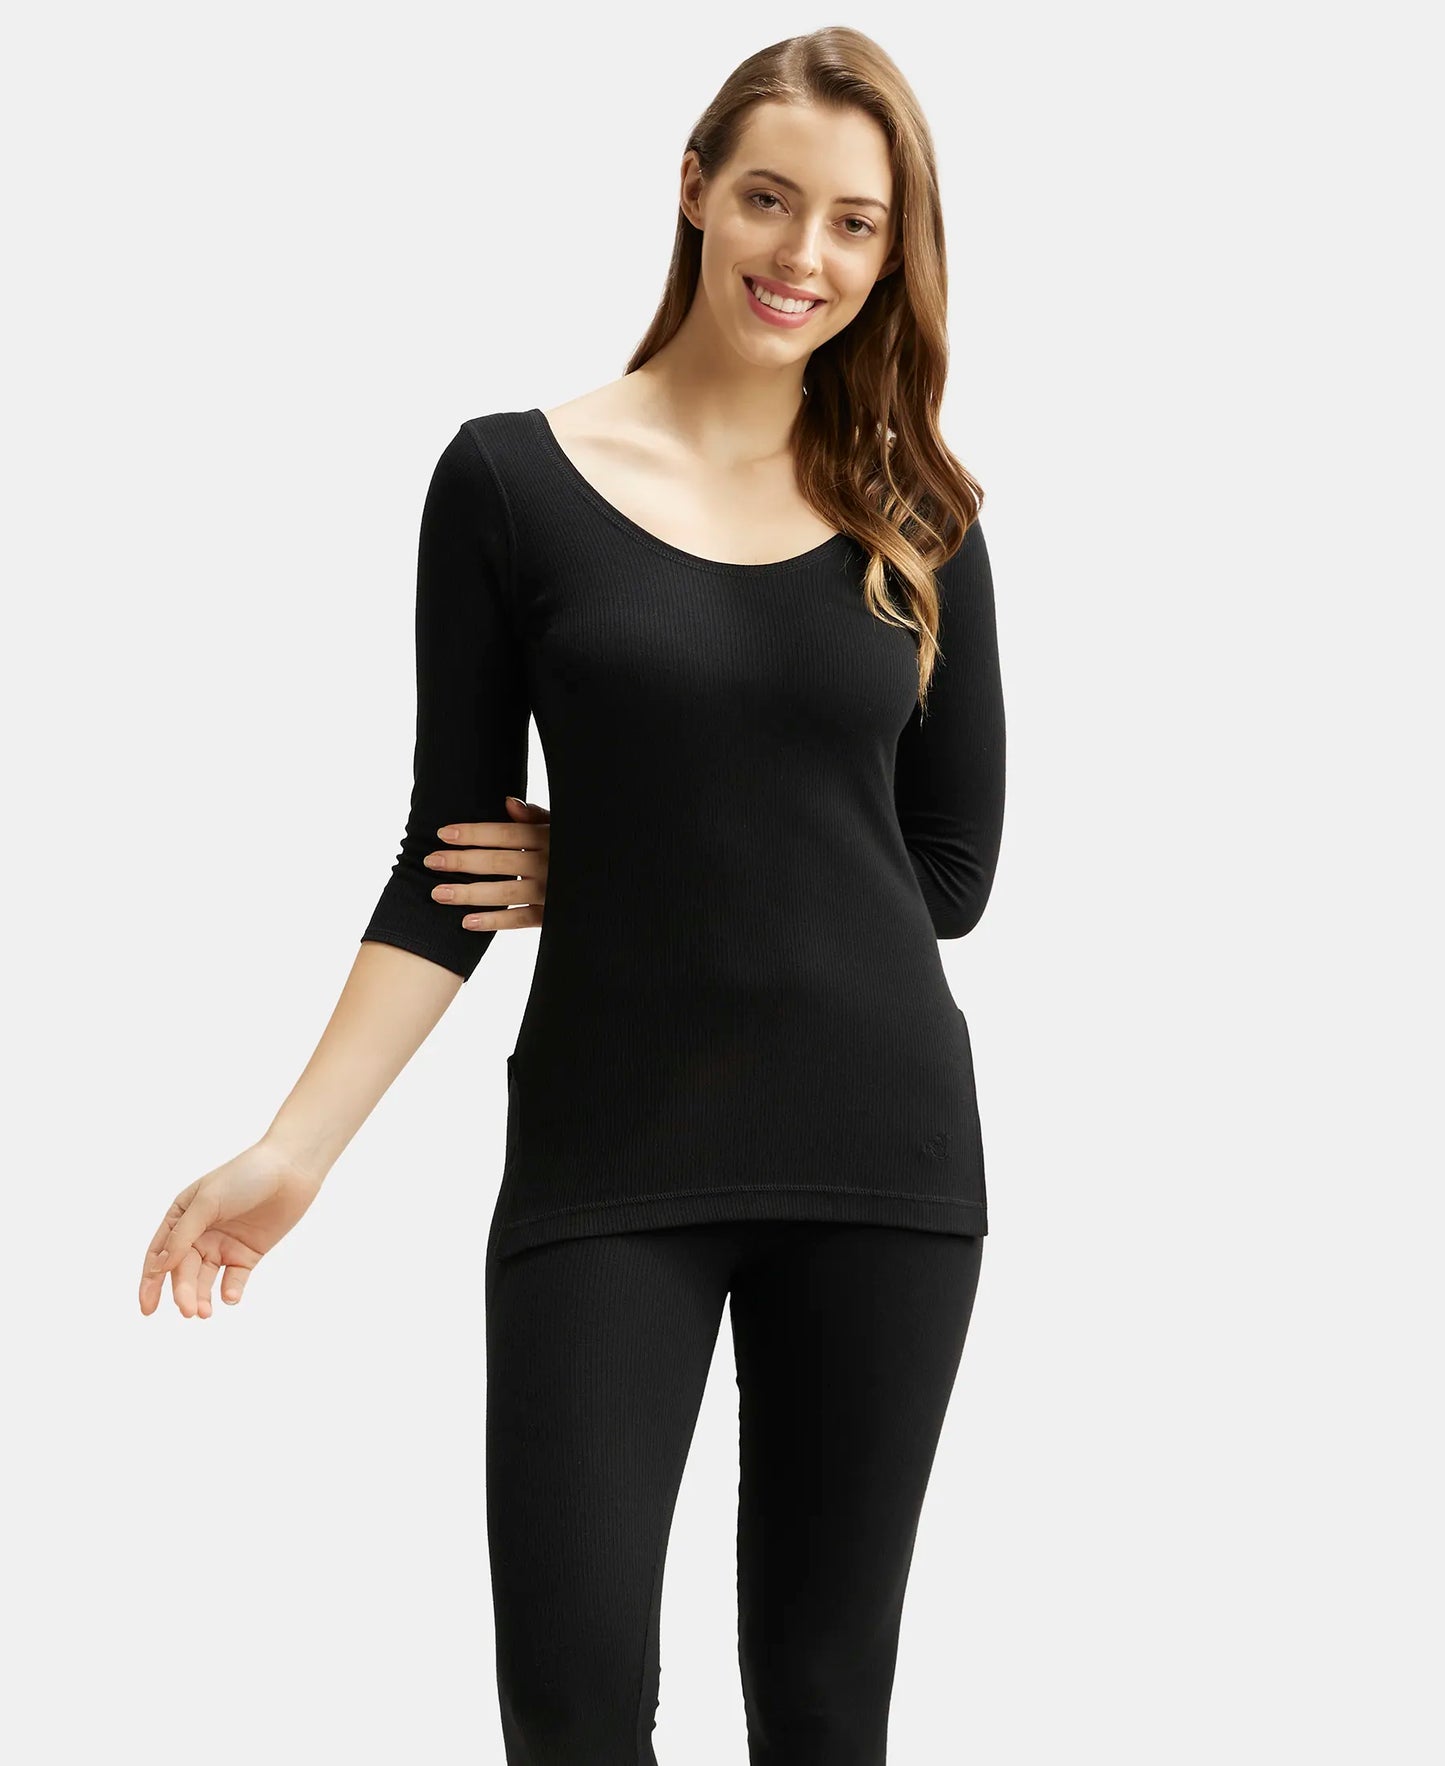 Super Combed Cotton Rich Three Quarter Sleeve Thermal Top with StayWarm Technology - Black-6